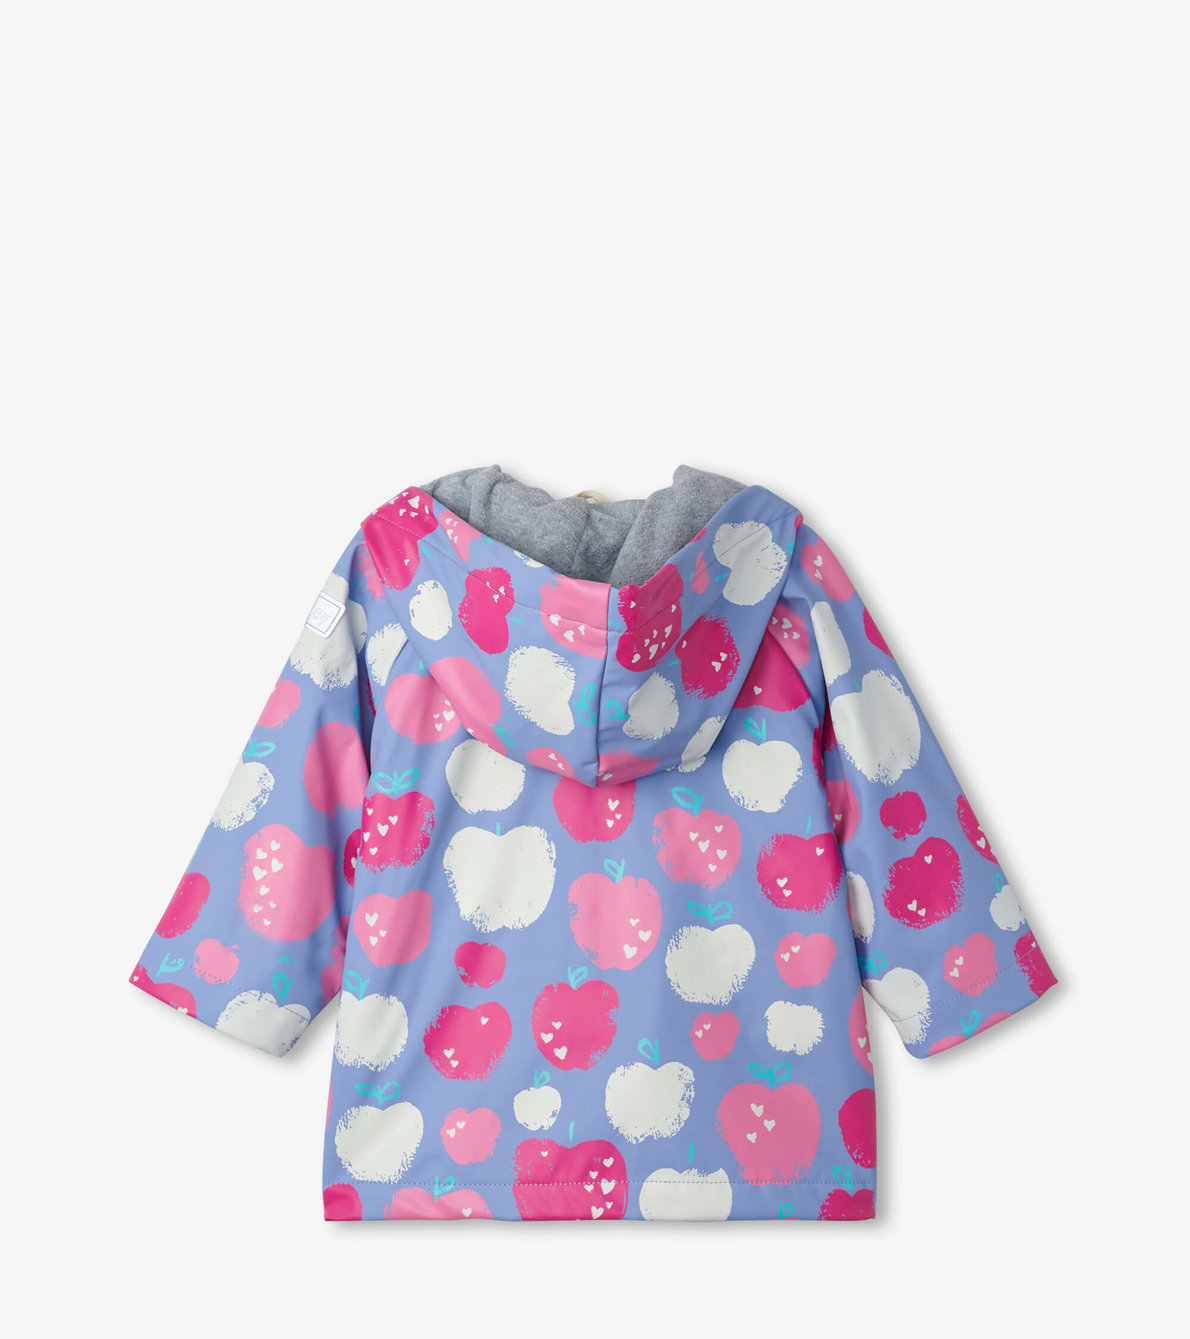 View larger image of Stamped Apples Baby Raincoat